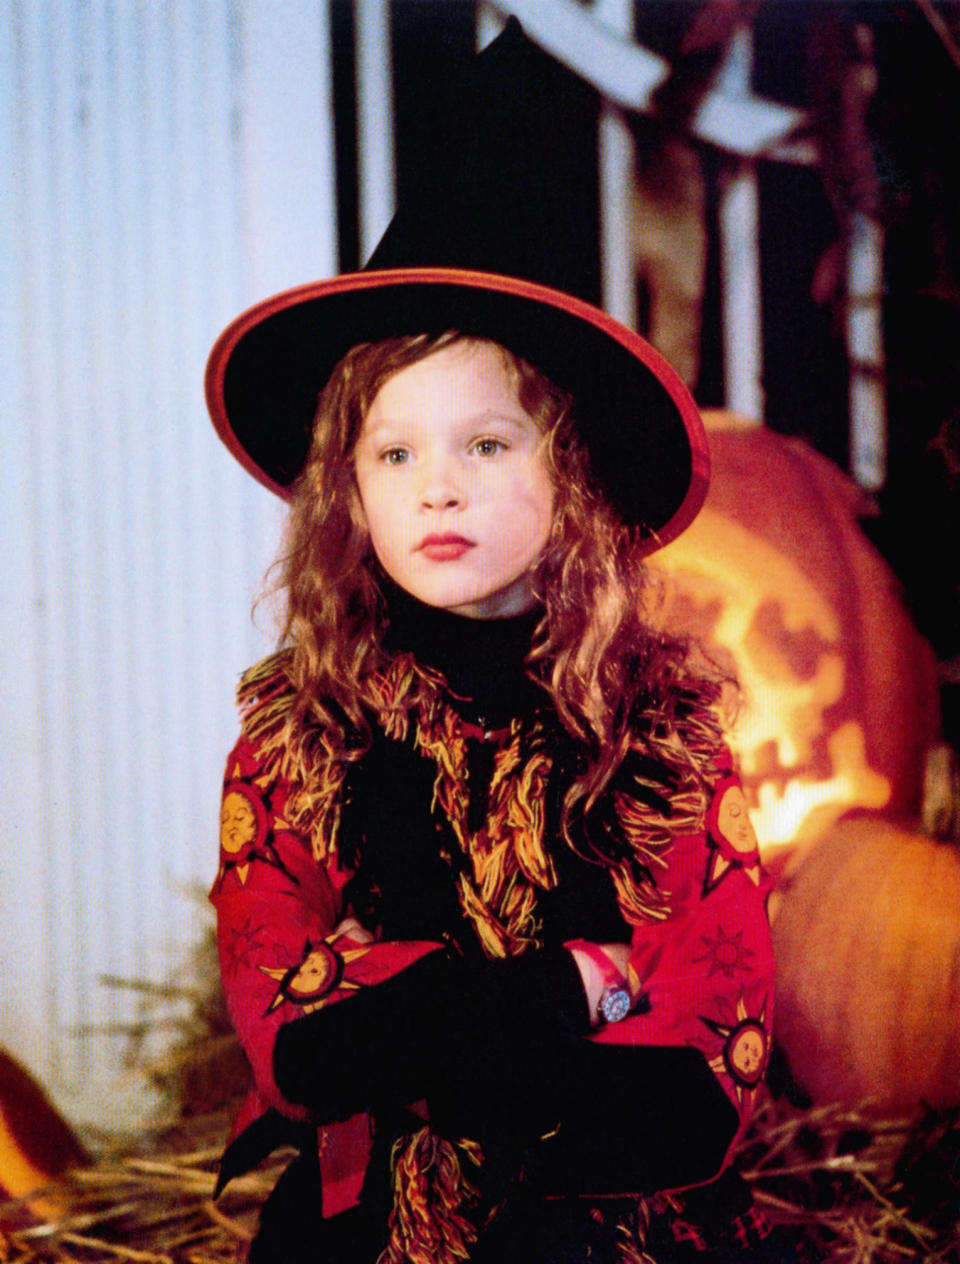 A young Thora wearing a witch's hat and has her arms crossed in a scene from Hocus Pocus